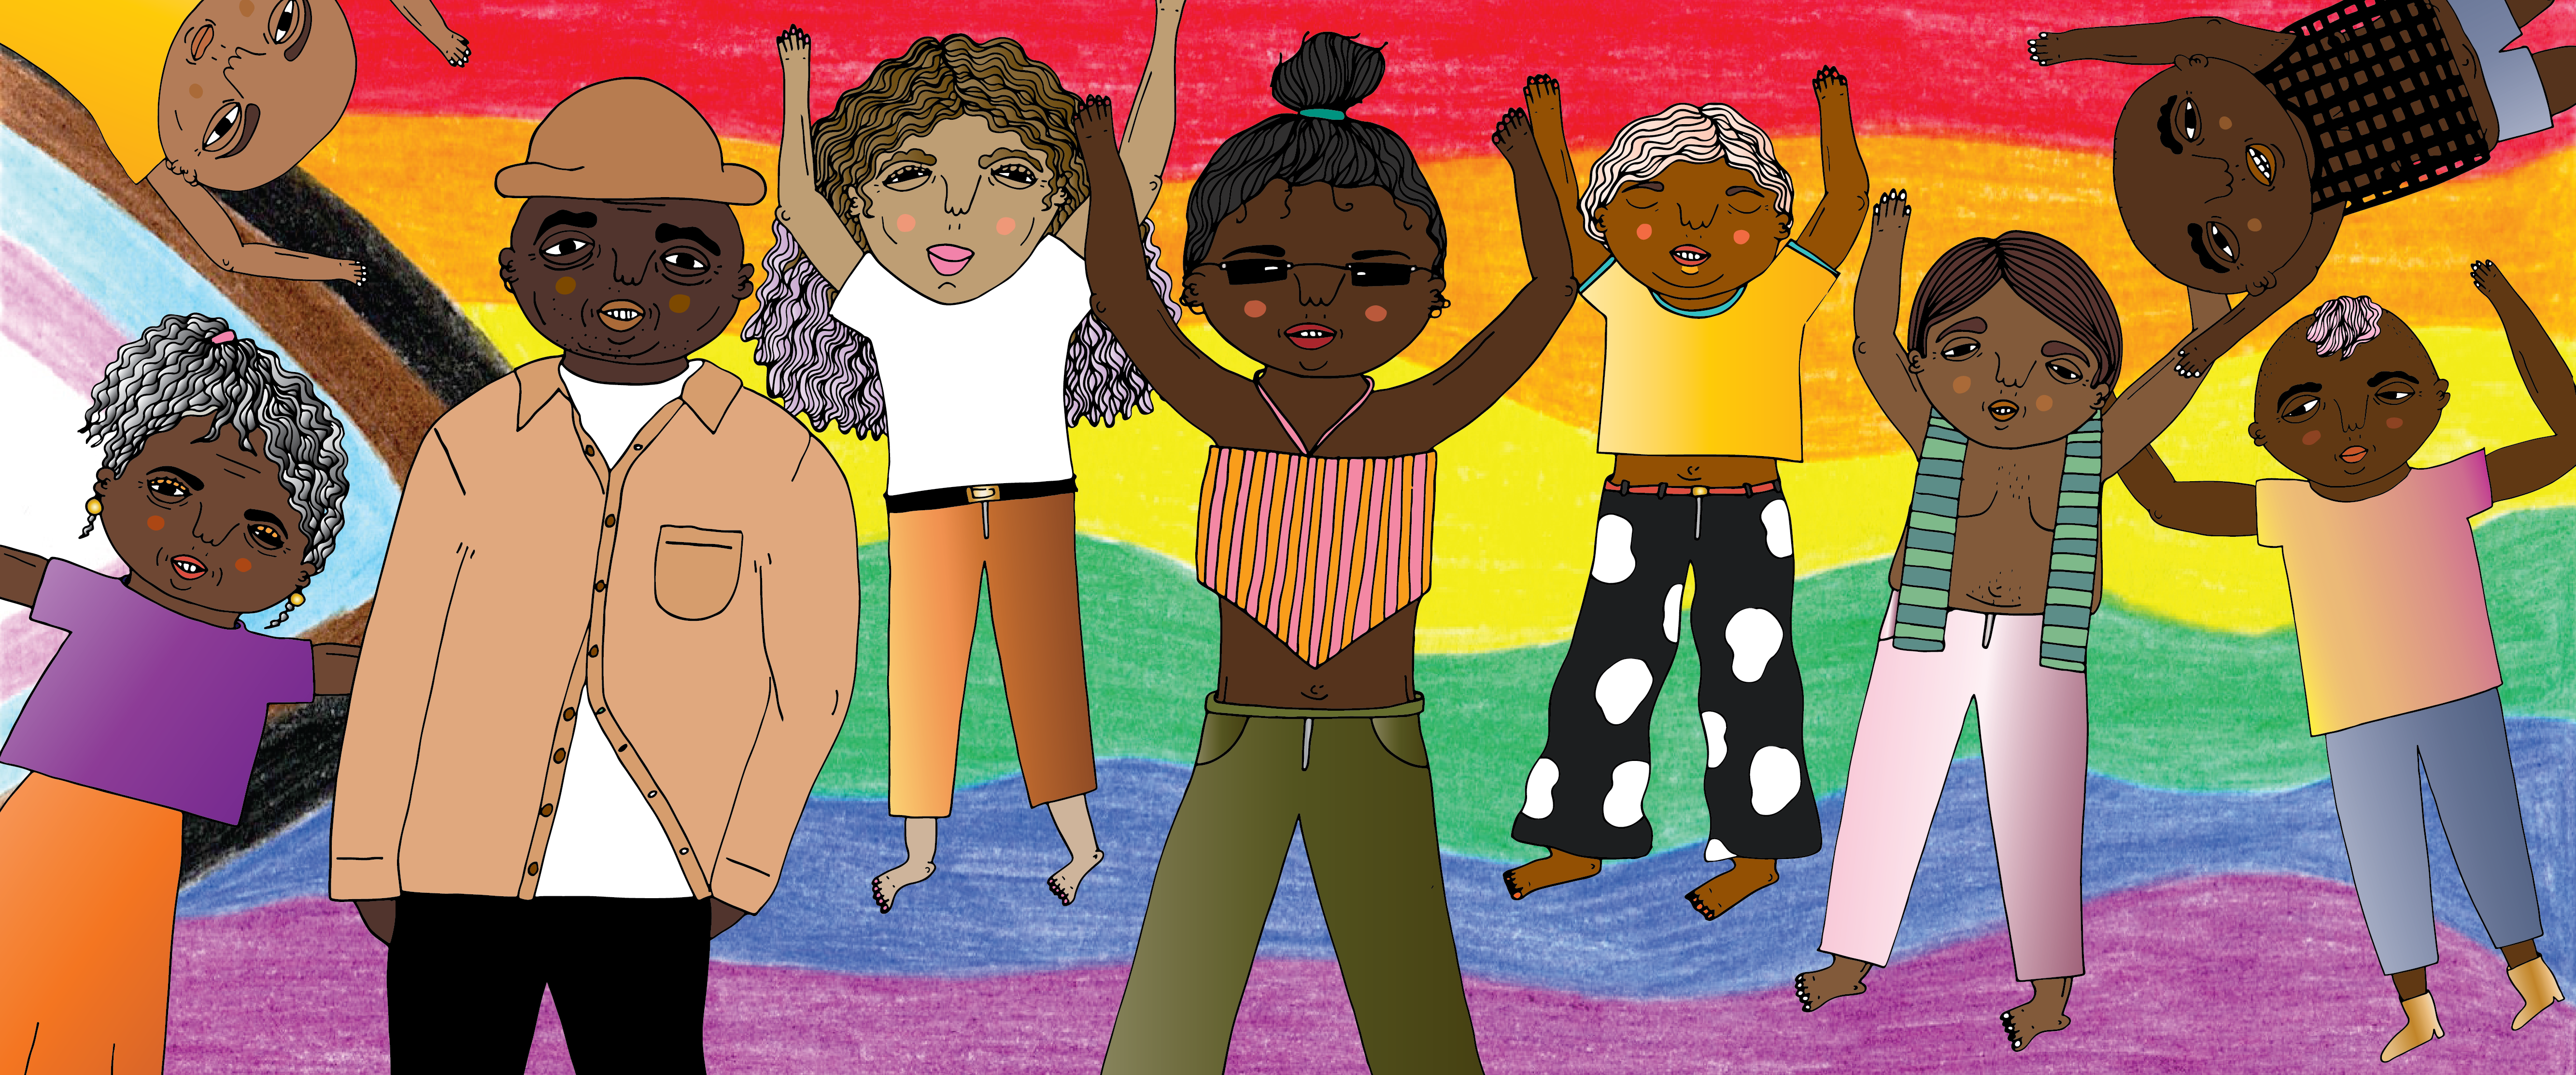 Archiving oral histories of black queer collectives in London